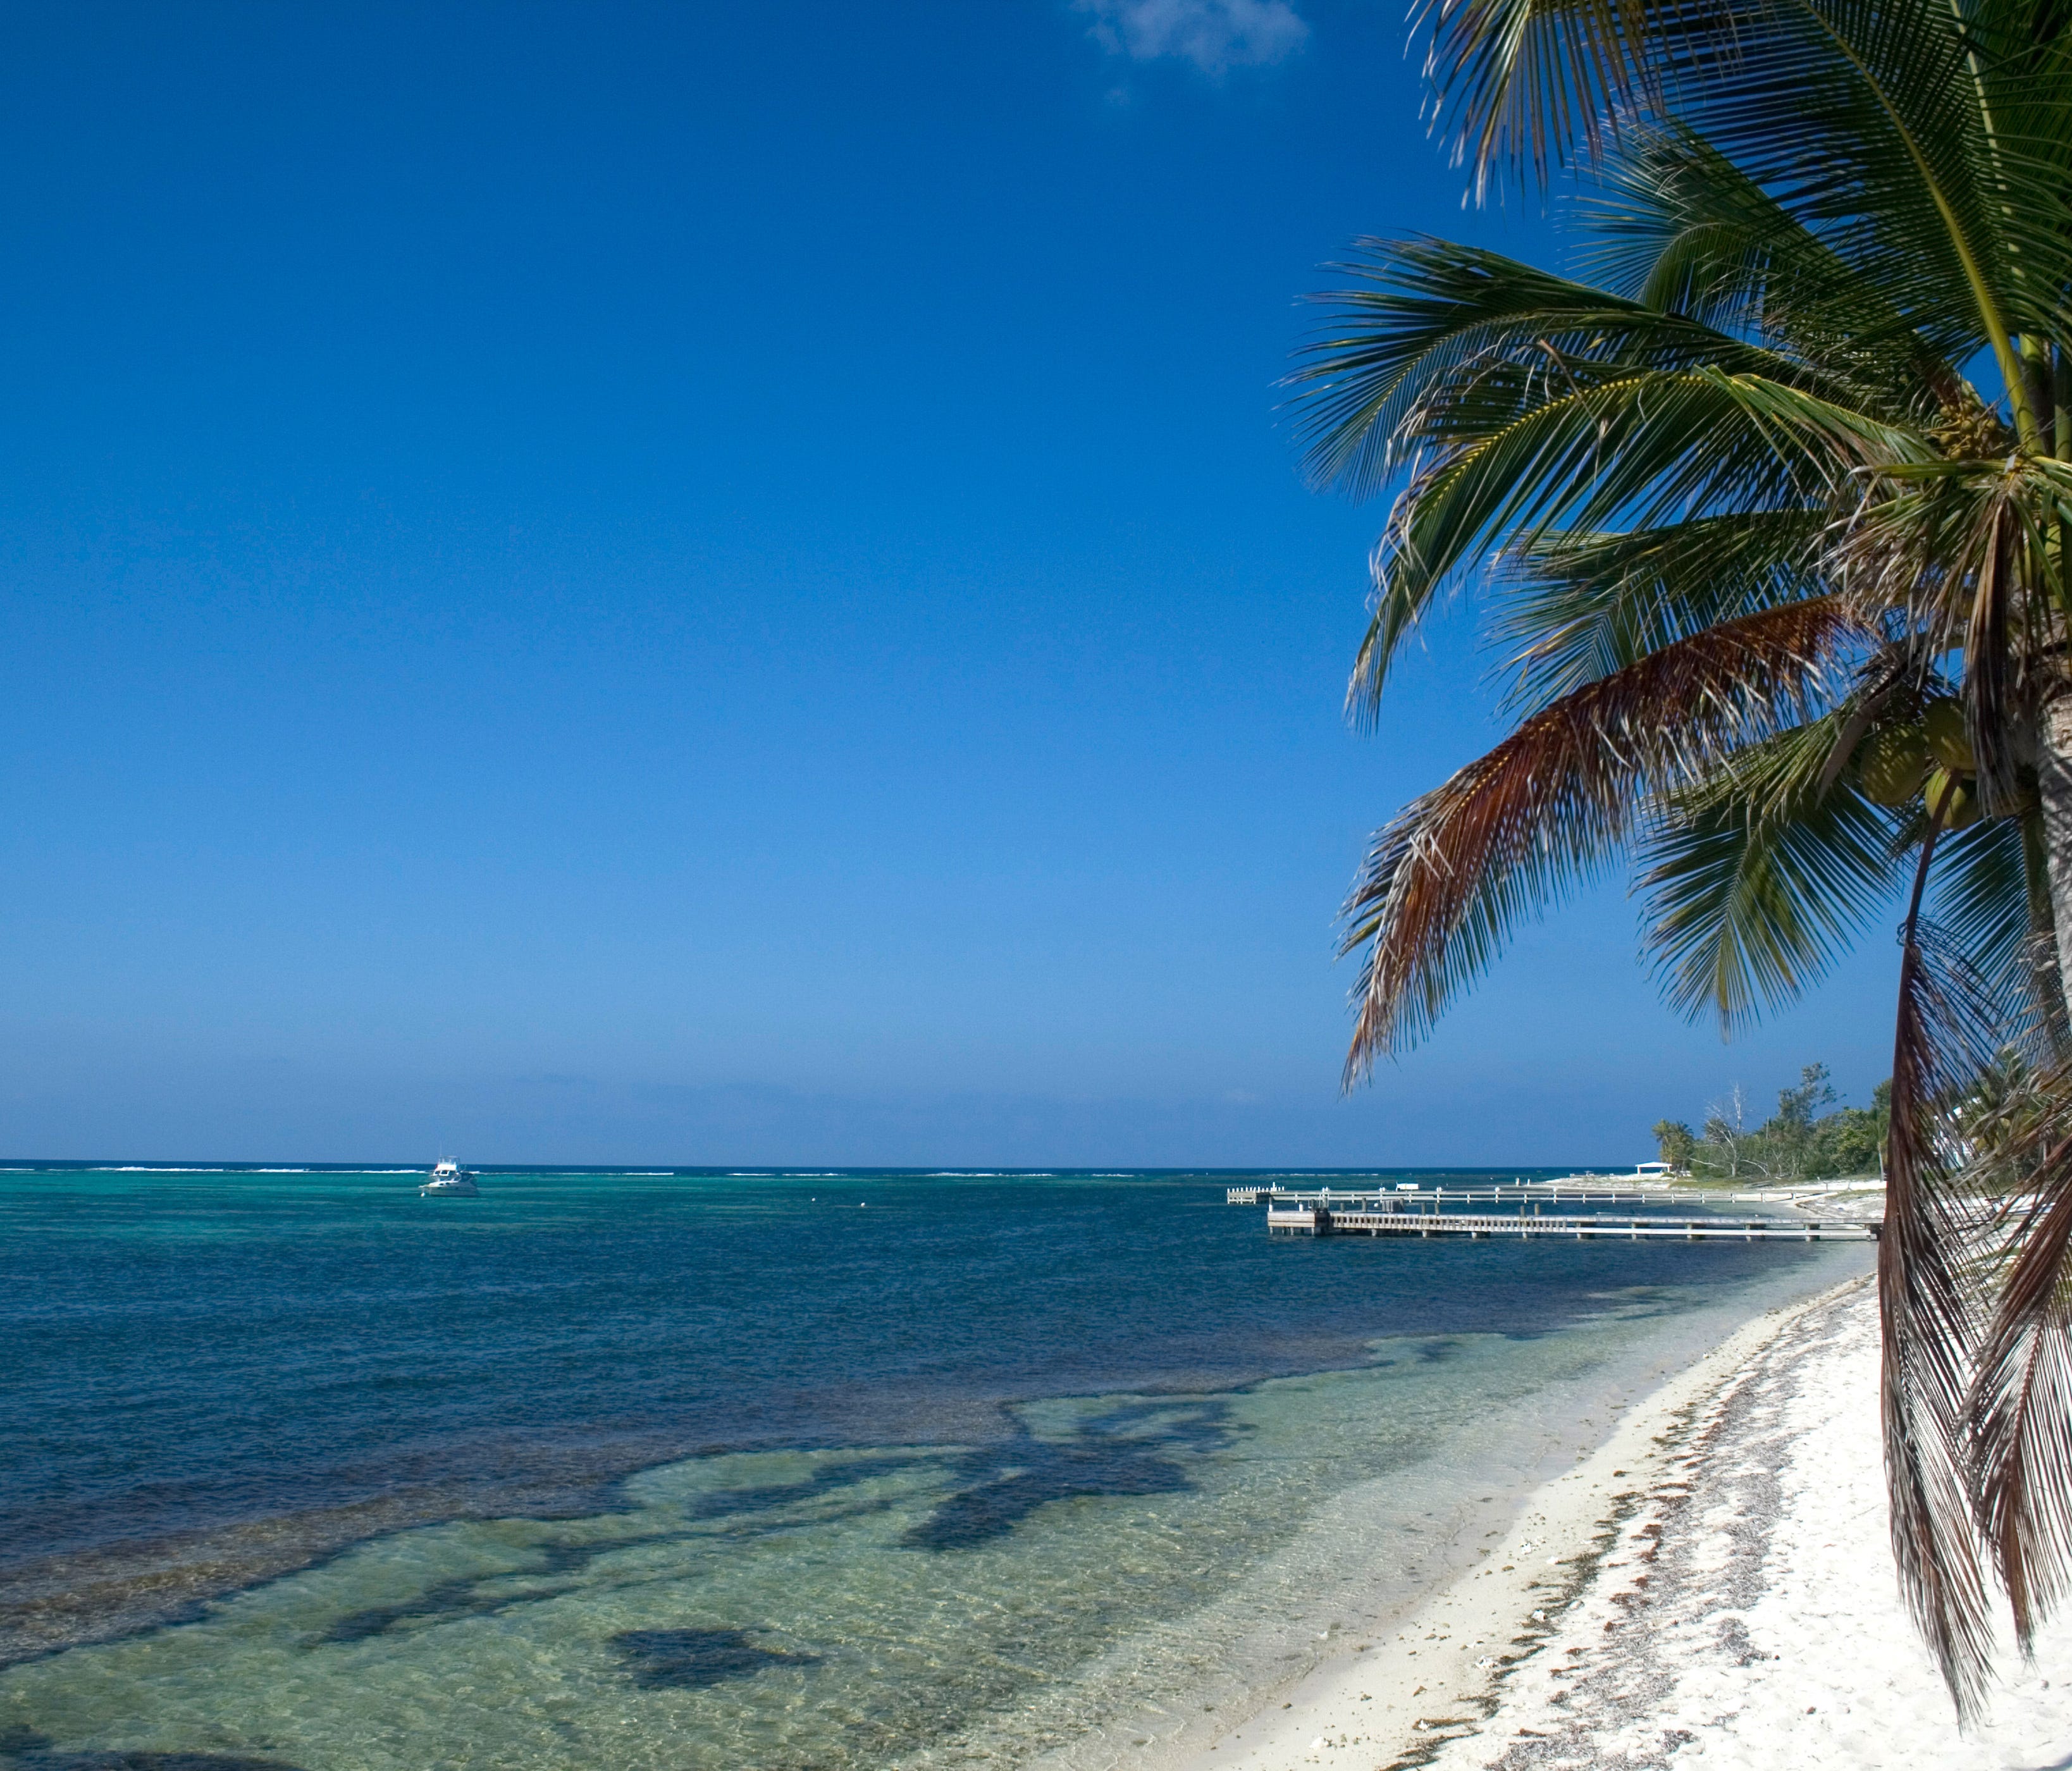 Little Cayman is the smallest of the three Cayman Islands.